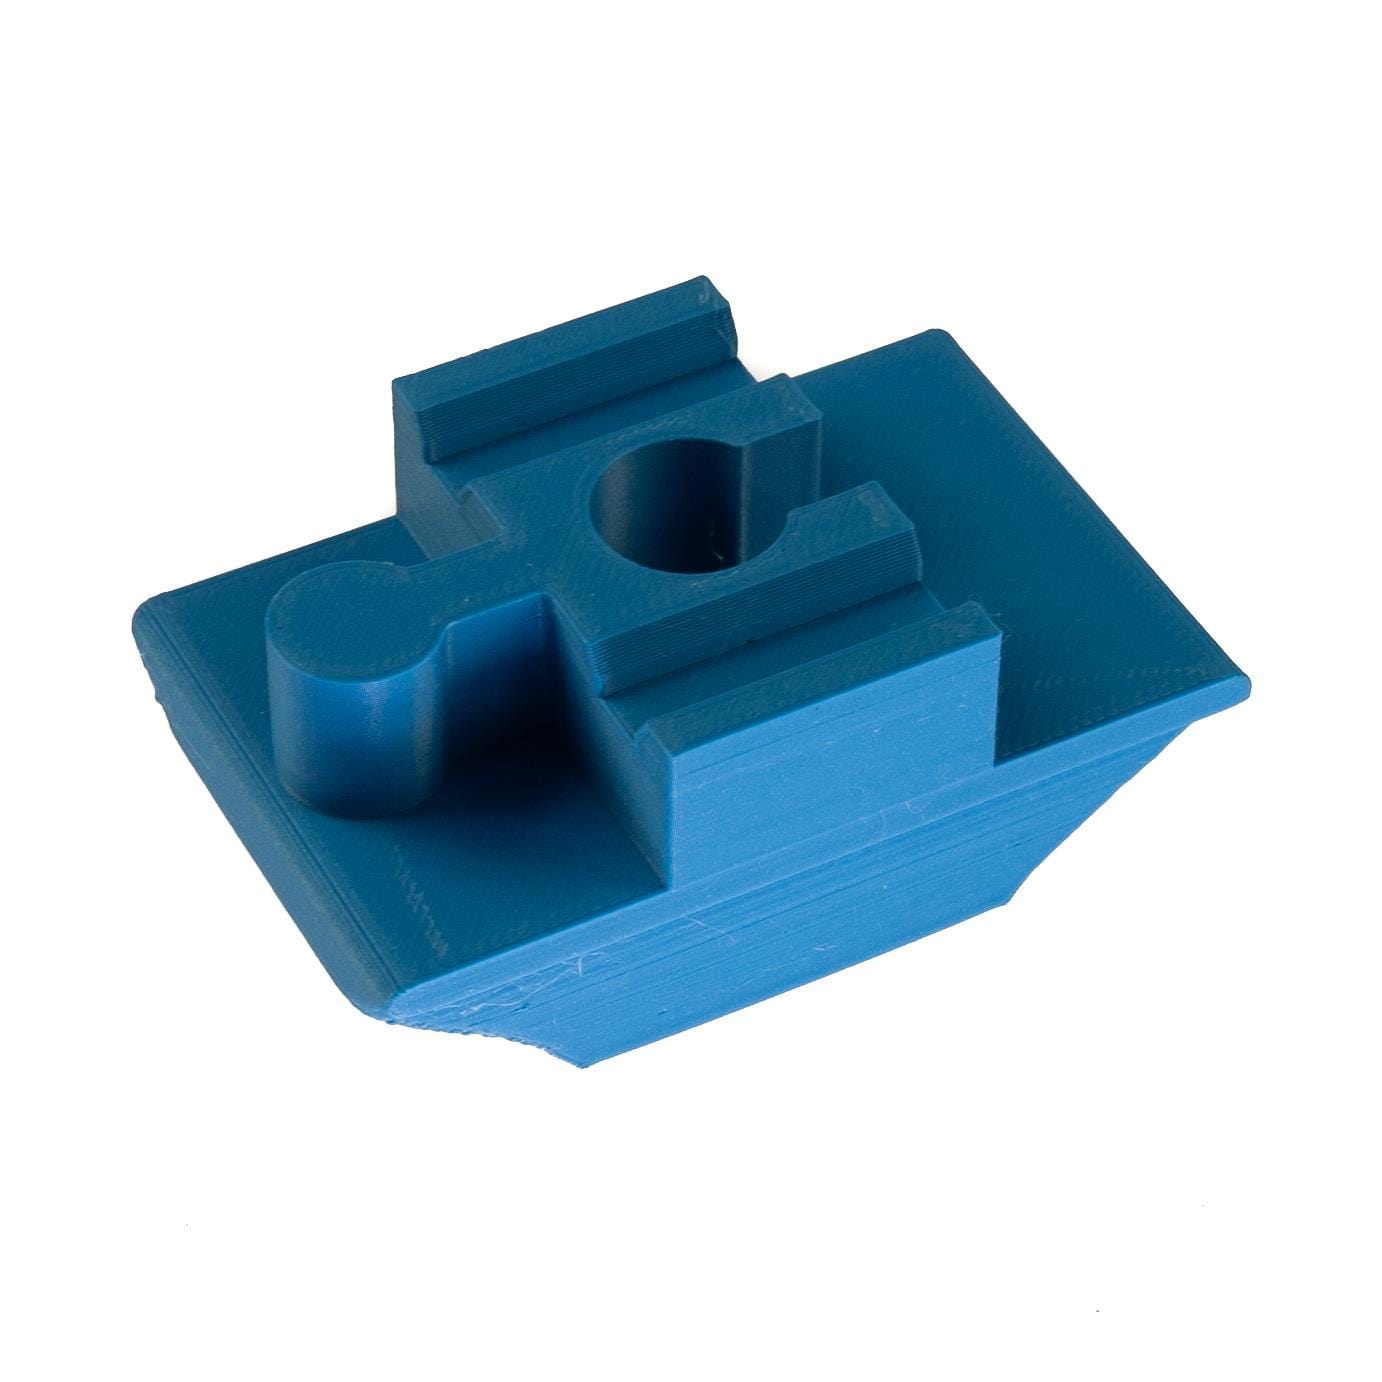 Wooden train track adapter compatible with Duplo and Brio fits onto 2 x 2 Brick Service Item Wayward Media 902083